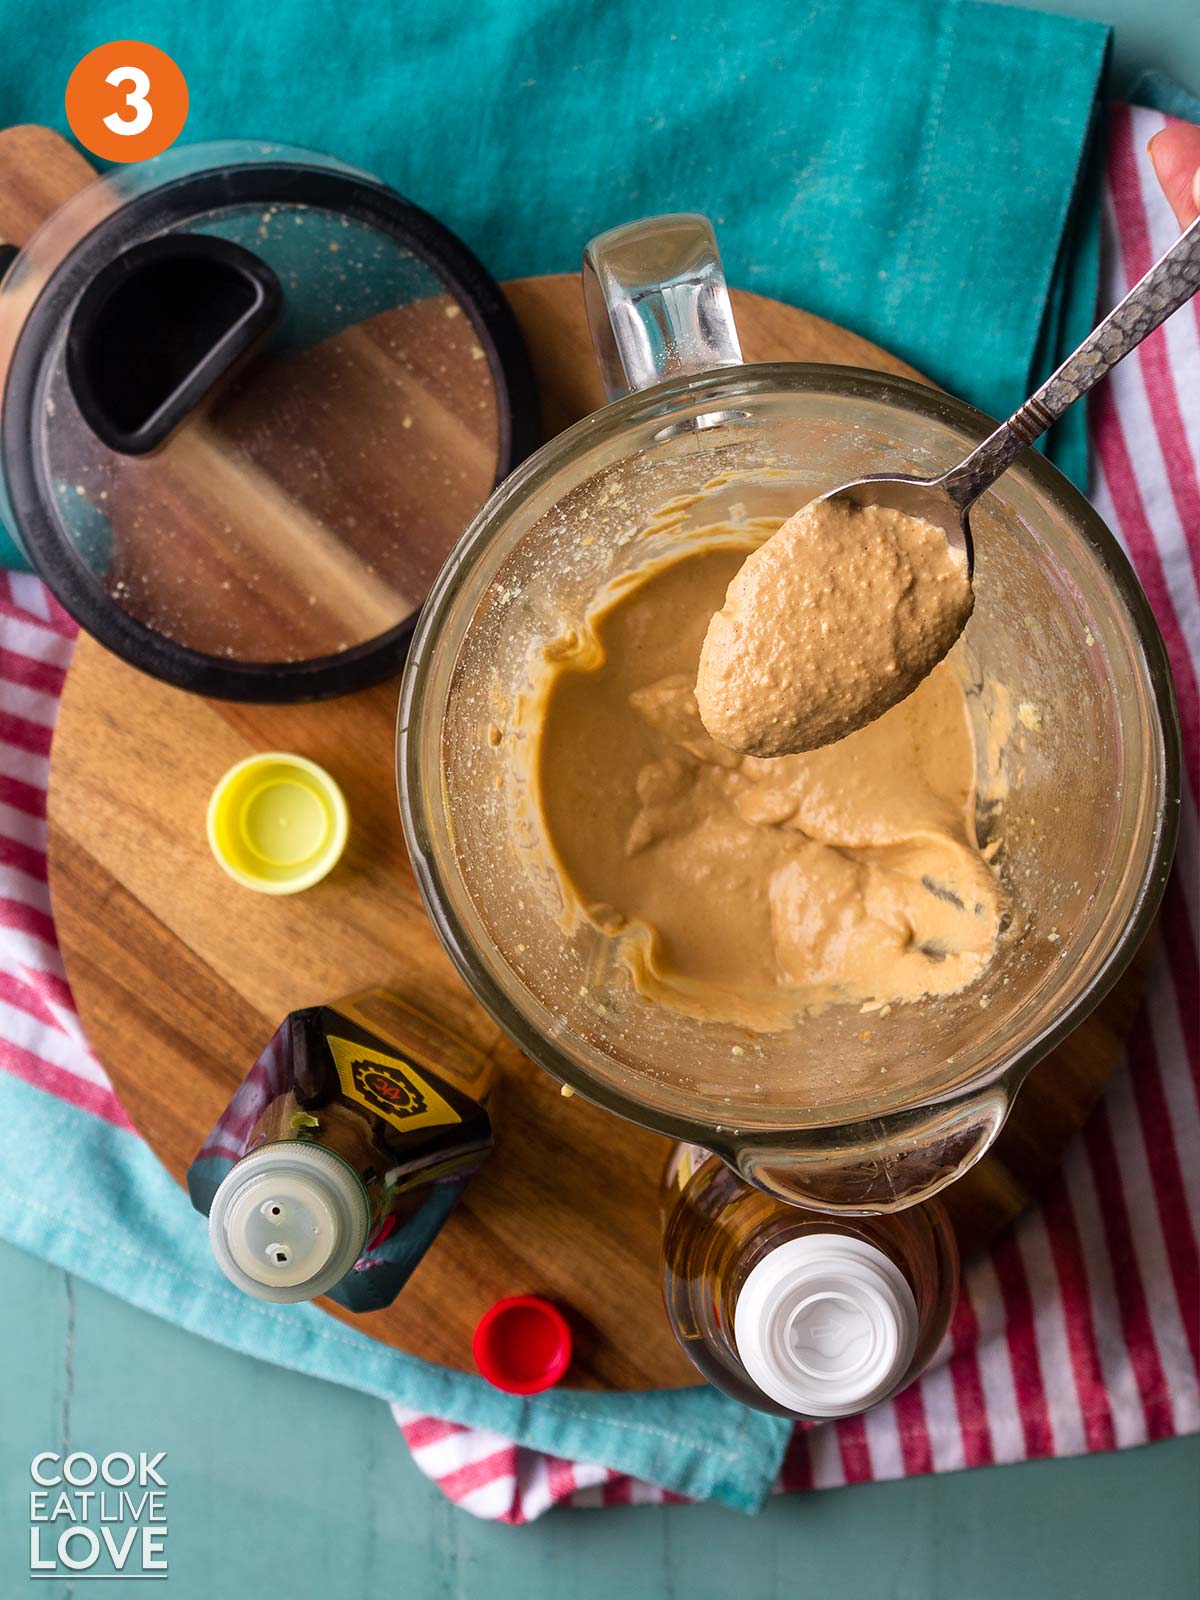 A spoonful of creamy peanut sauce up over the blender.